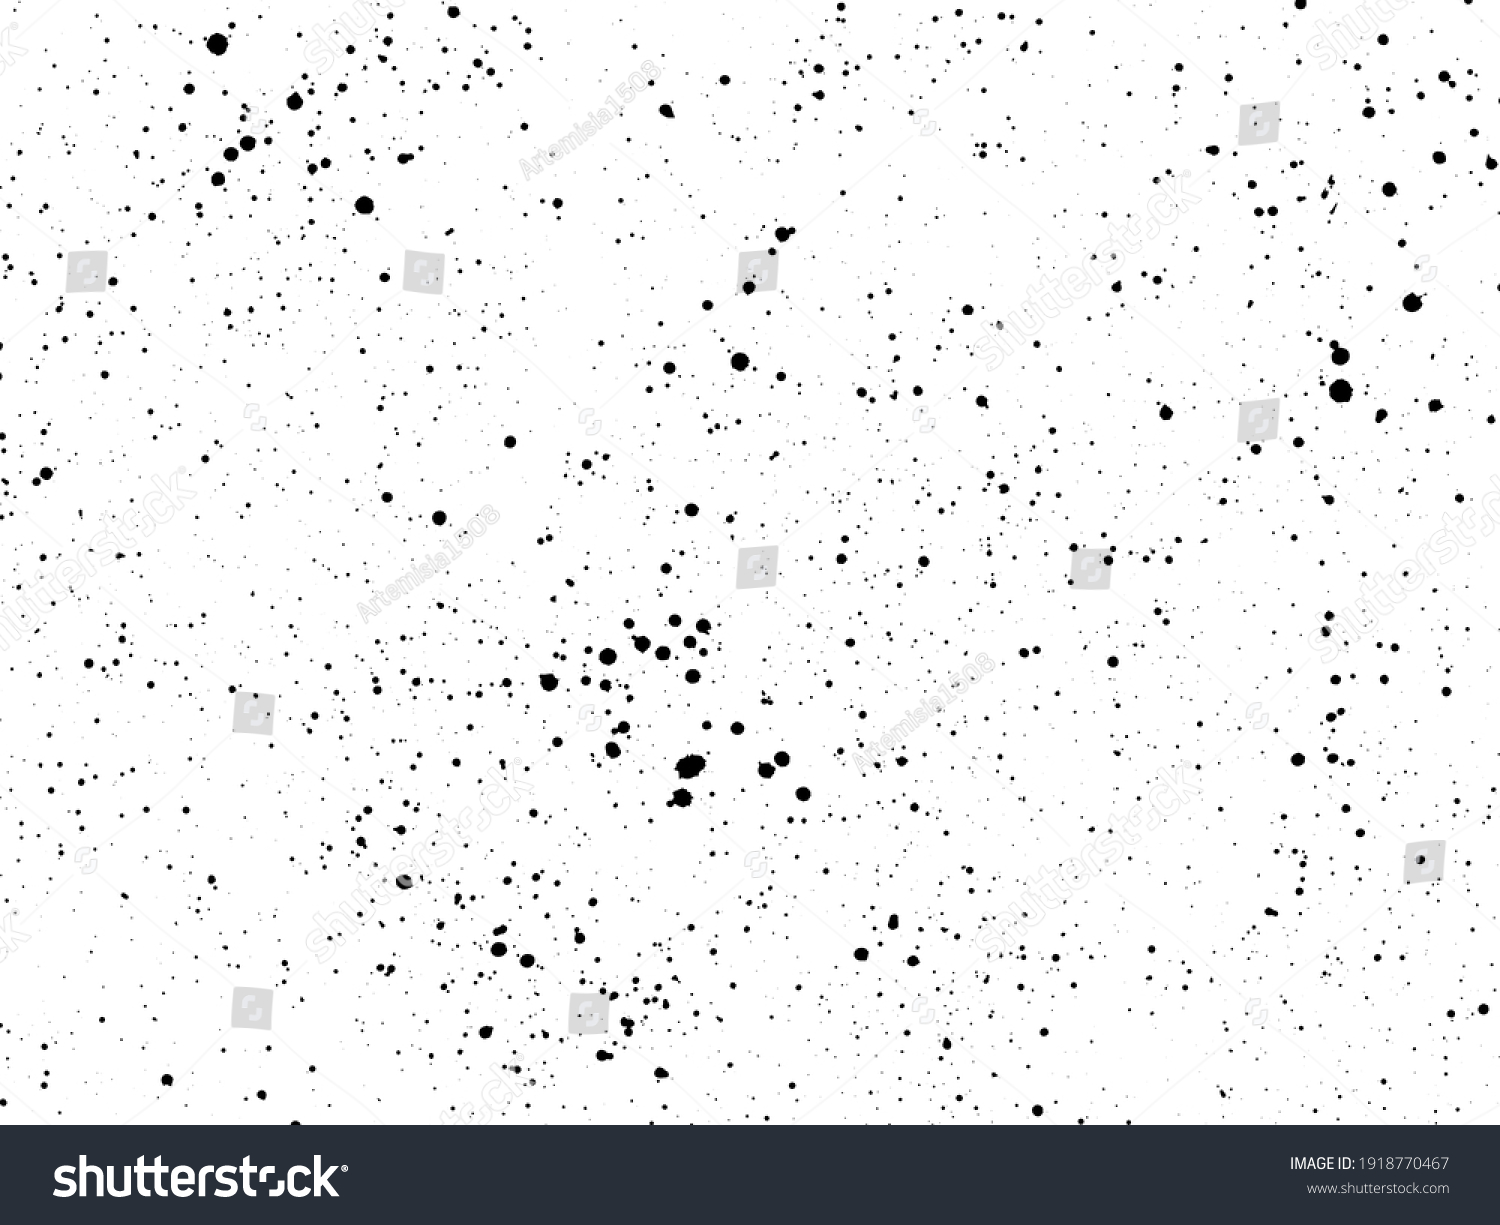 Ink blots Grunge urban background. Texture Vector. Dust overlay distress grain. Black paint splatter, dirty, poster for your design. Hand drawing illustration #1918770467